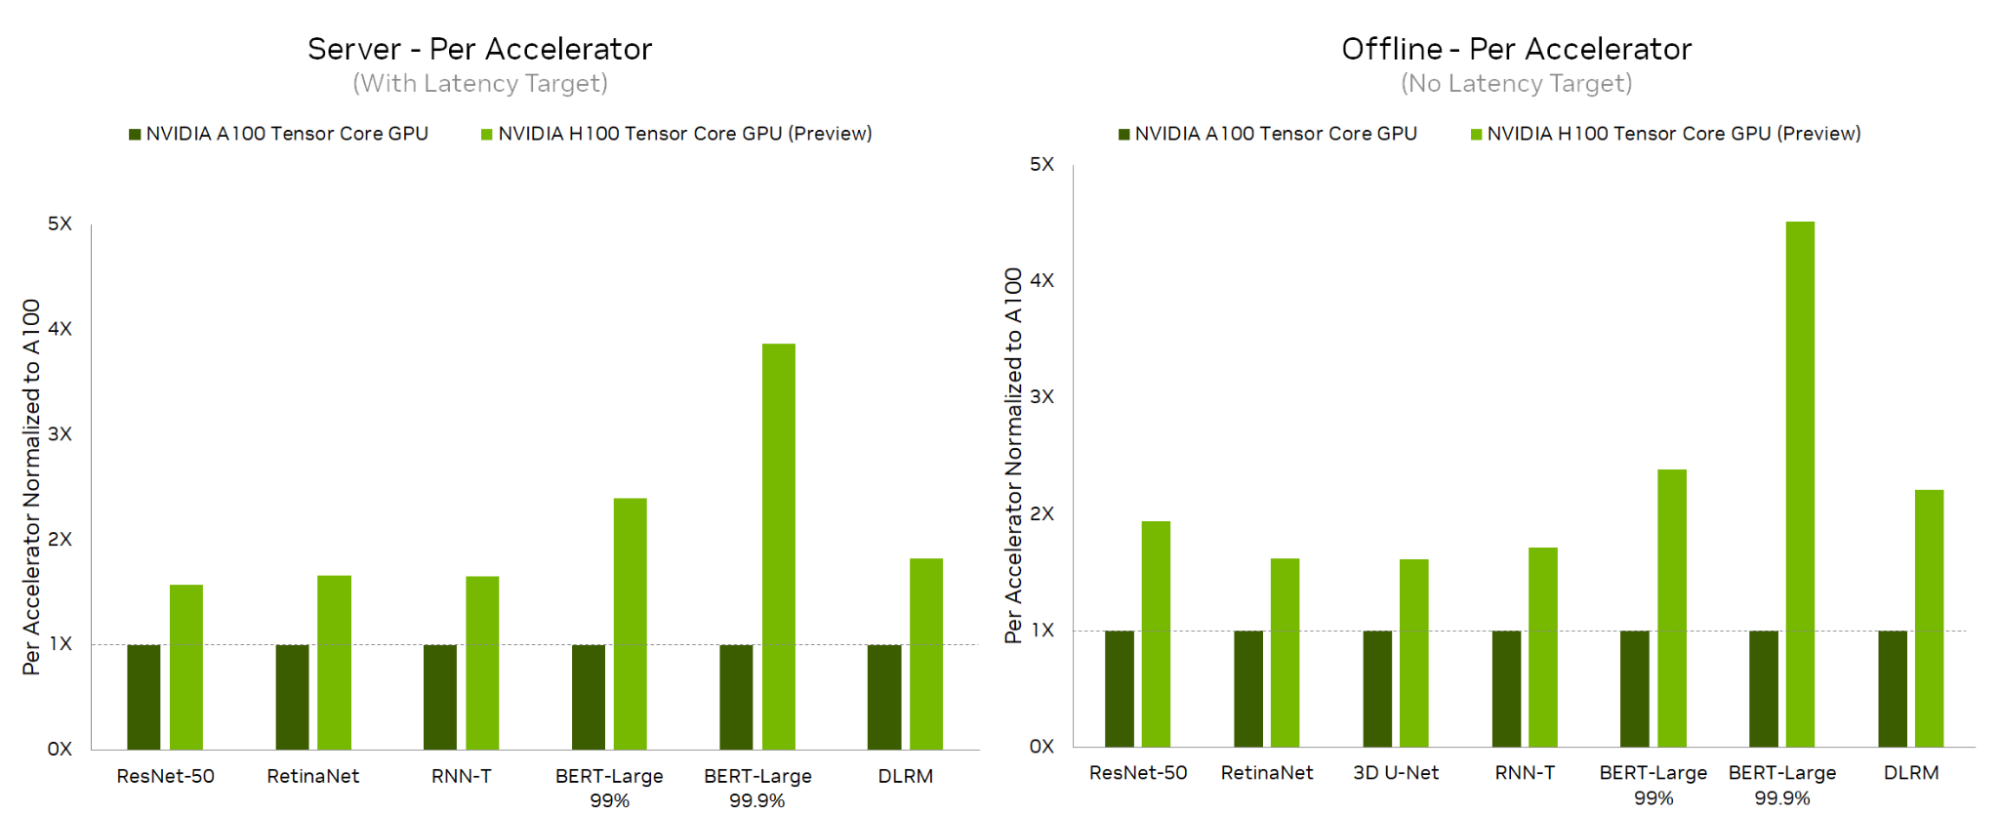 Left bar chart shows the H100 delivering up to 3.9x more performance than the A100 in the Server scenario. Right chart shows H100 delivering up to 4.5x more performance than A100 in the Offline scenario.